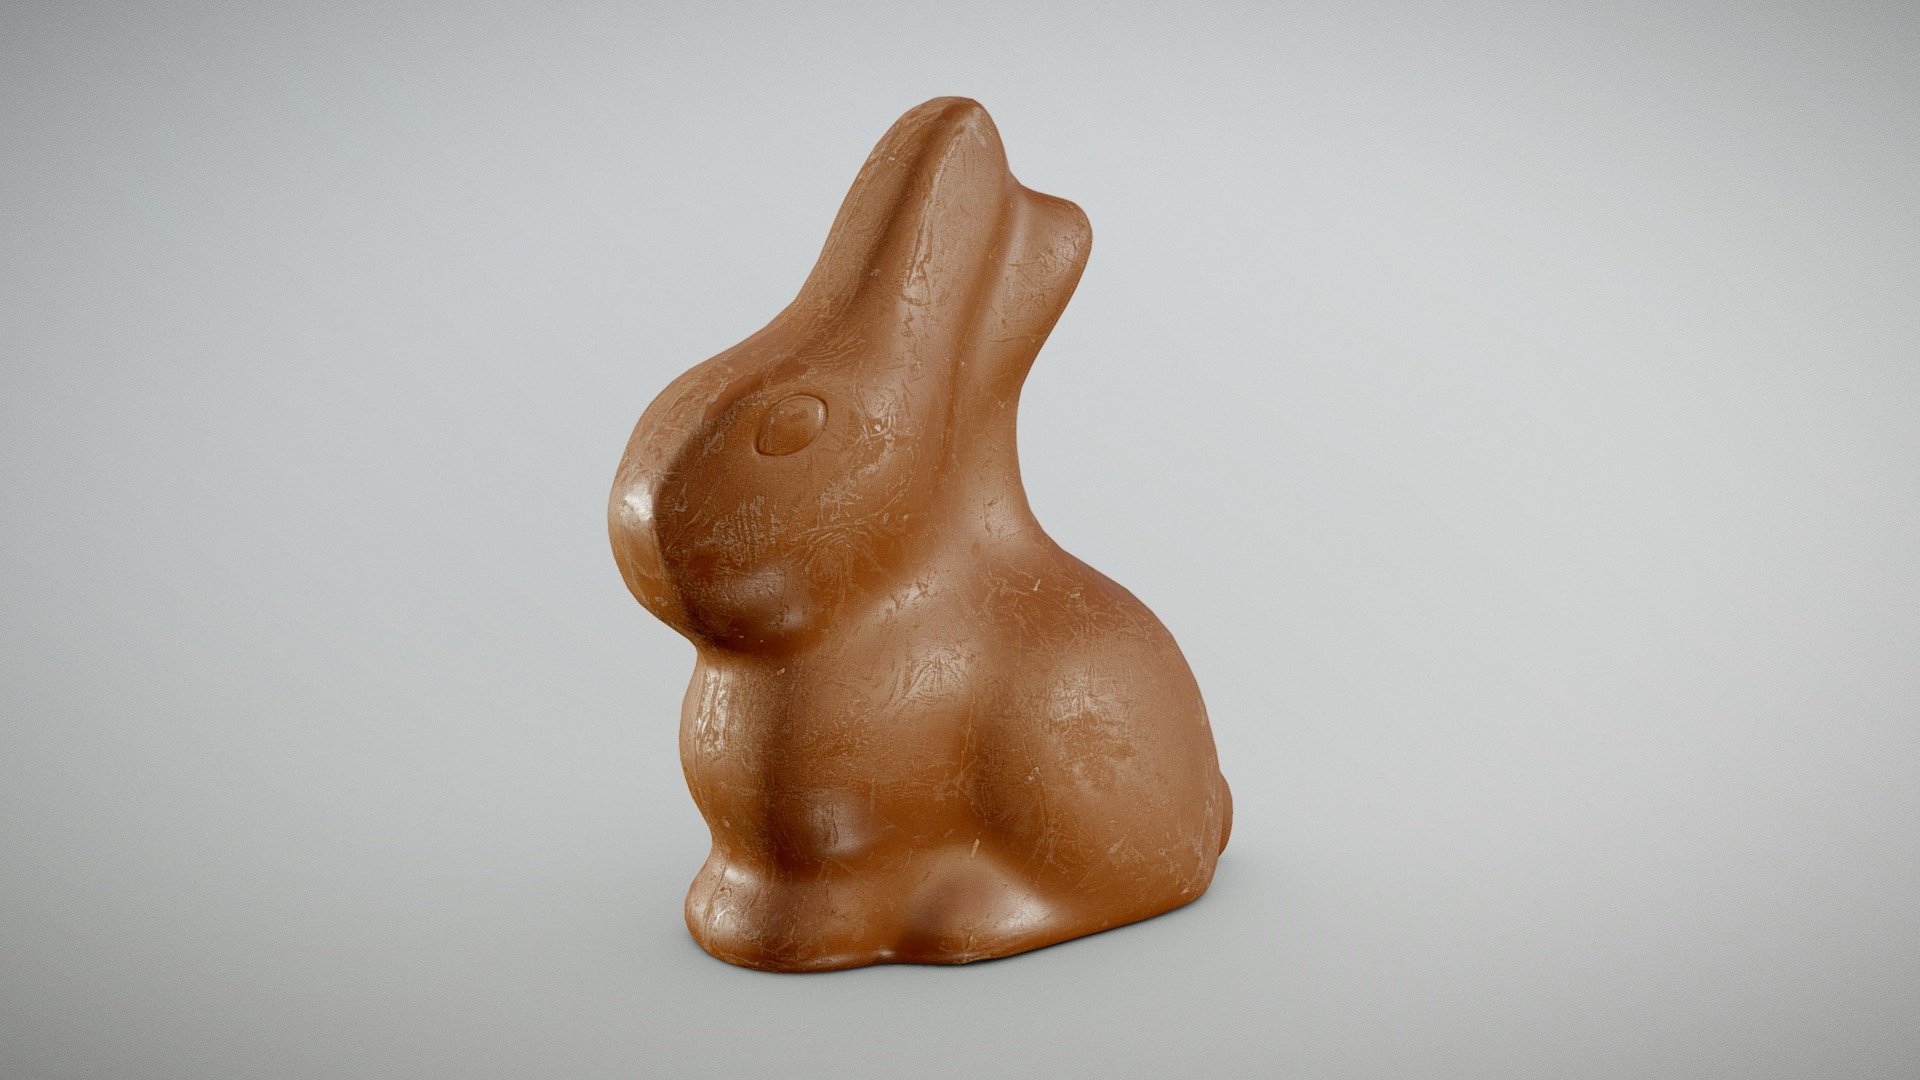 ** Chocolate Bunny **

Lindt GOLD BUNNY Milk Chocolate from Germany.

9.8 x 4.9 x 11.1 cm (43 micrometers per texel @ 4k)

Scanned using advanced technology developed by inciprocal Inc. that enables highly photo-realistic reproduction of real-world products in virtual environments. Our hardware and software technology combines advanced photometry, structured light, photogrammtery and light fields to capture and generate accurate material representations from tens of thousands of images targeting real-time and offline path-traced PBR compatible renderers.

Zip file includes low-poly OBJ mesh (in meters) with a set of 4k PBR textures compressed with lossless JPEG (no chroma sub-sampling) 3d model